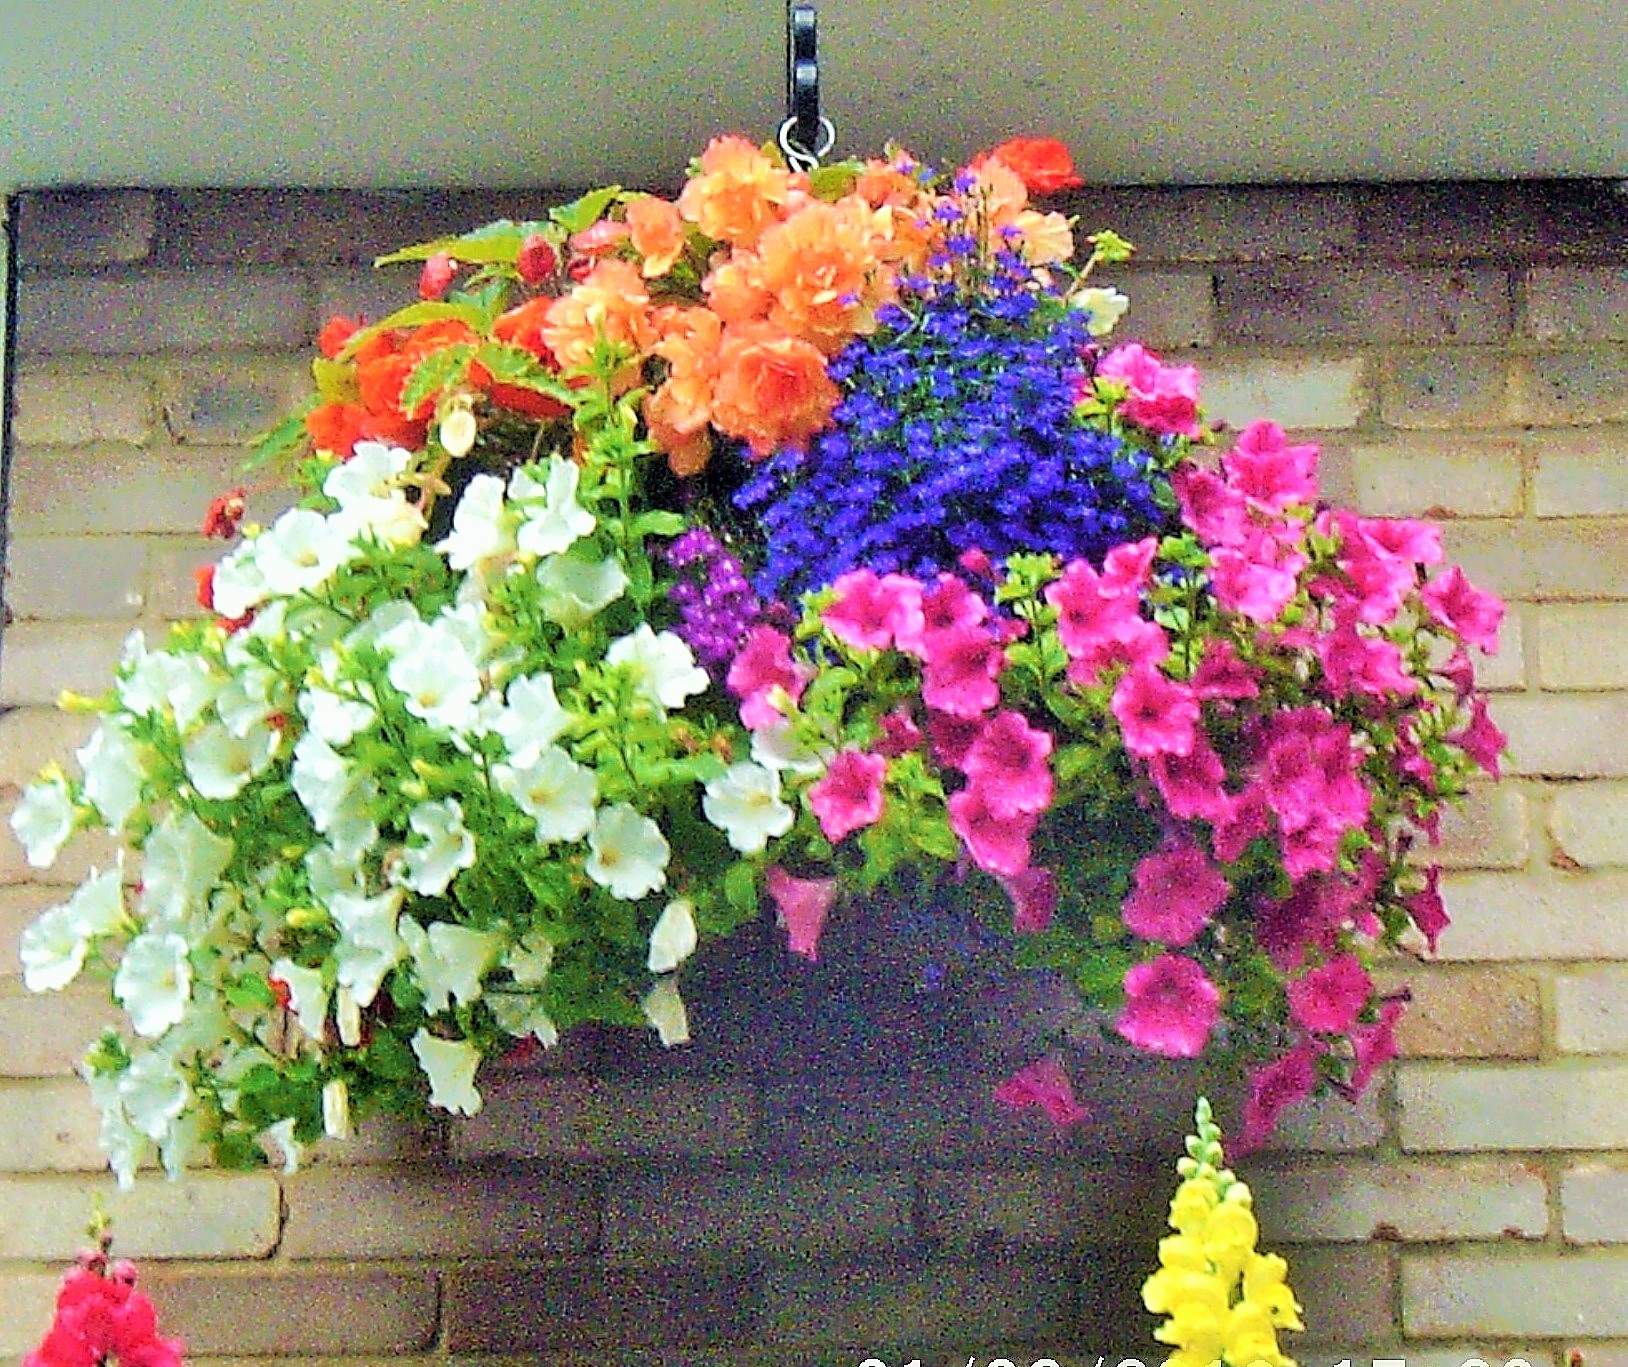 One of my hanging baskets.